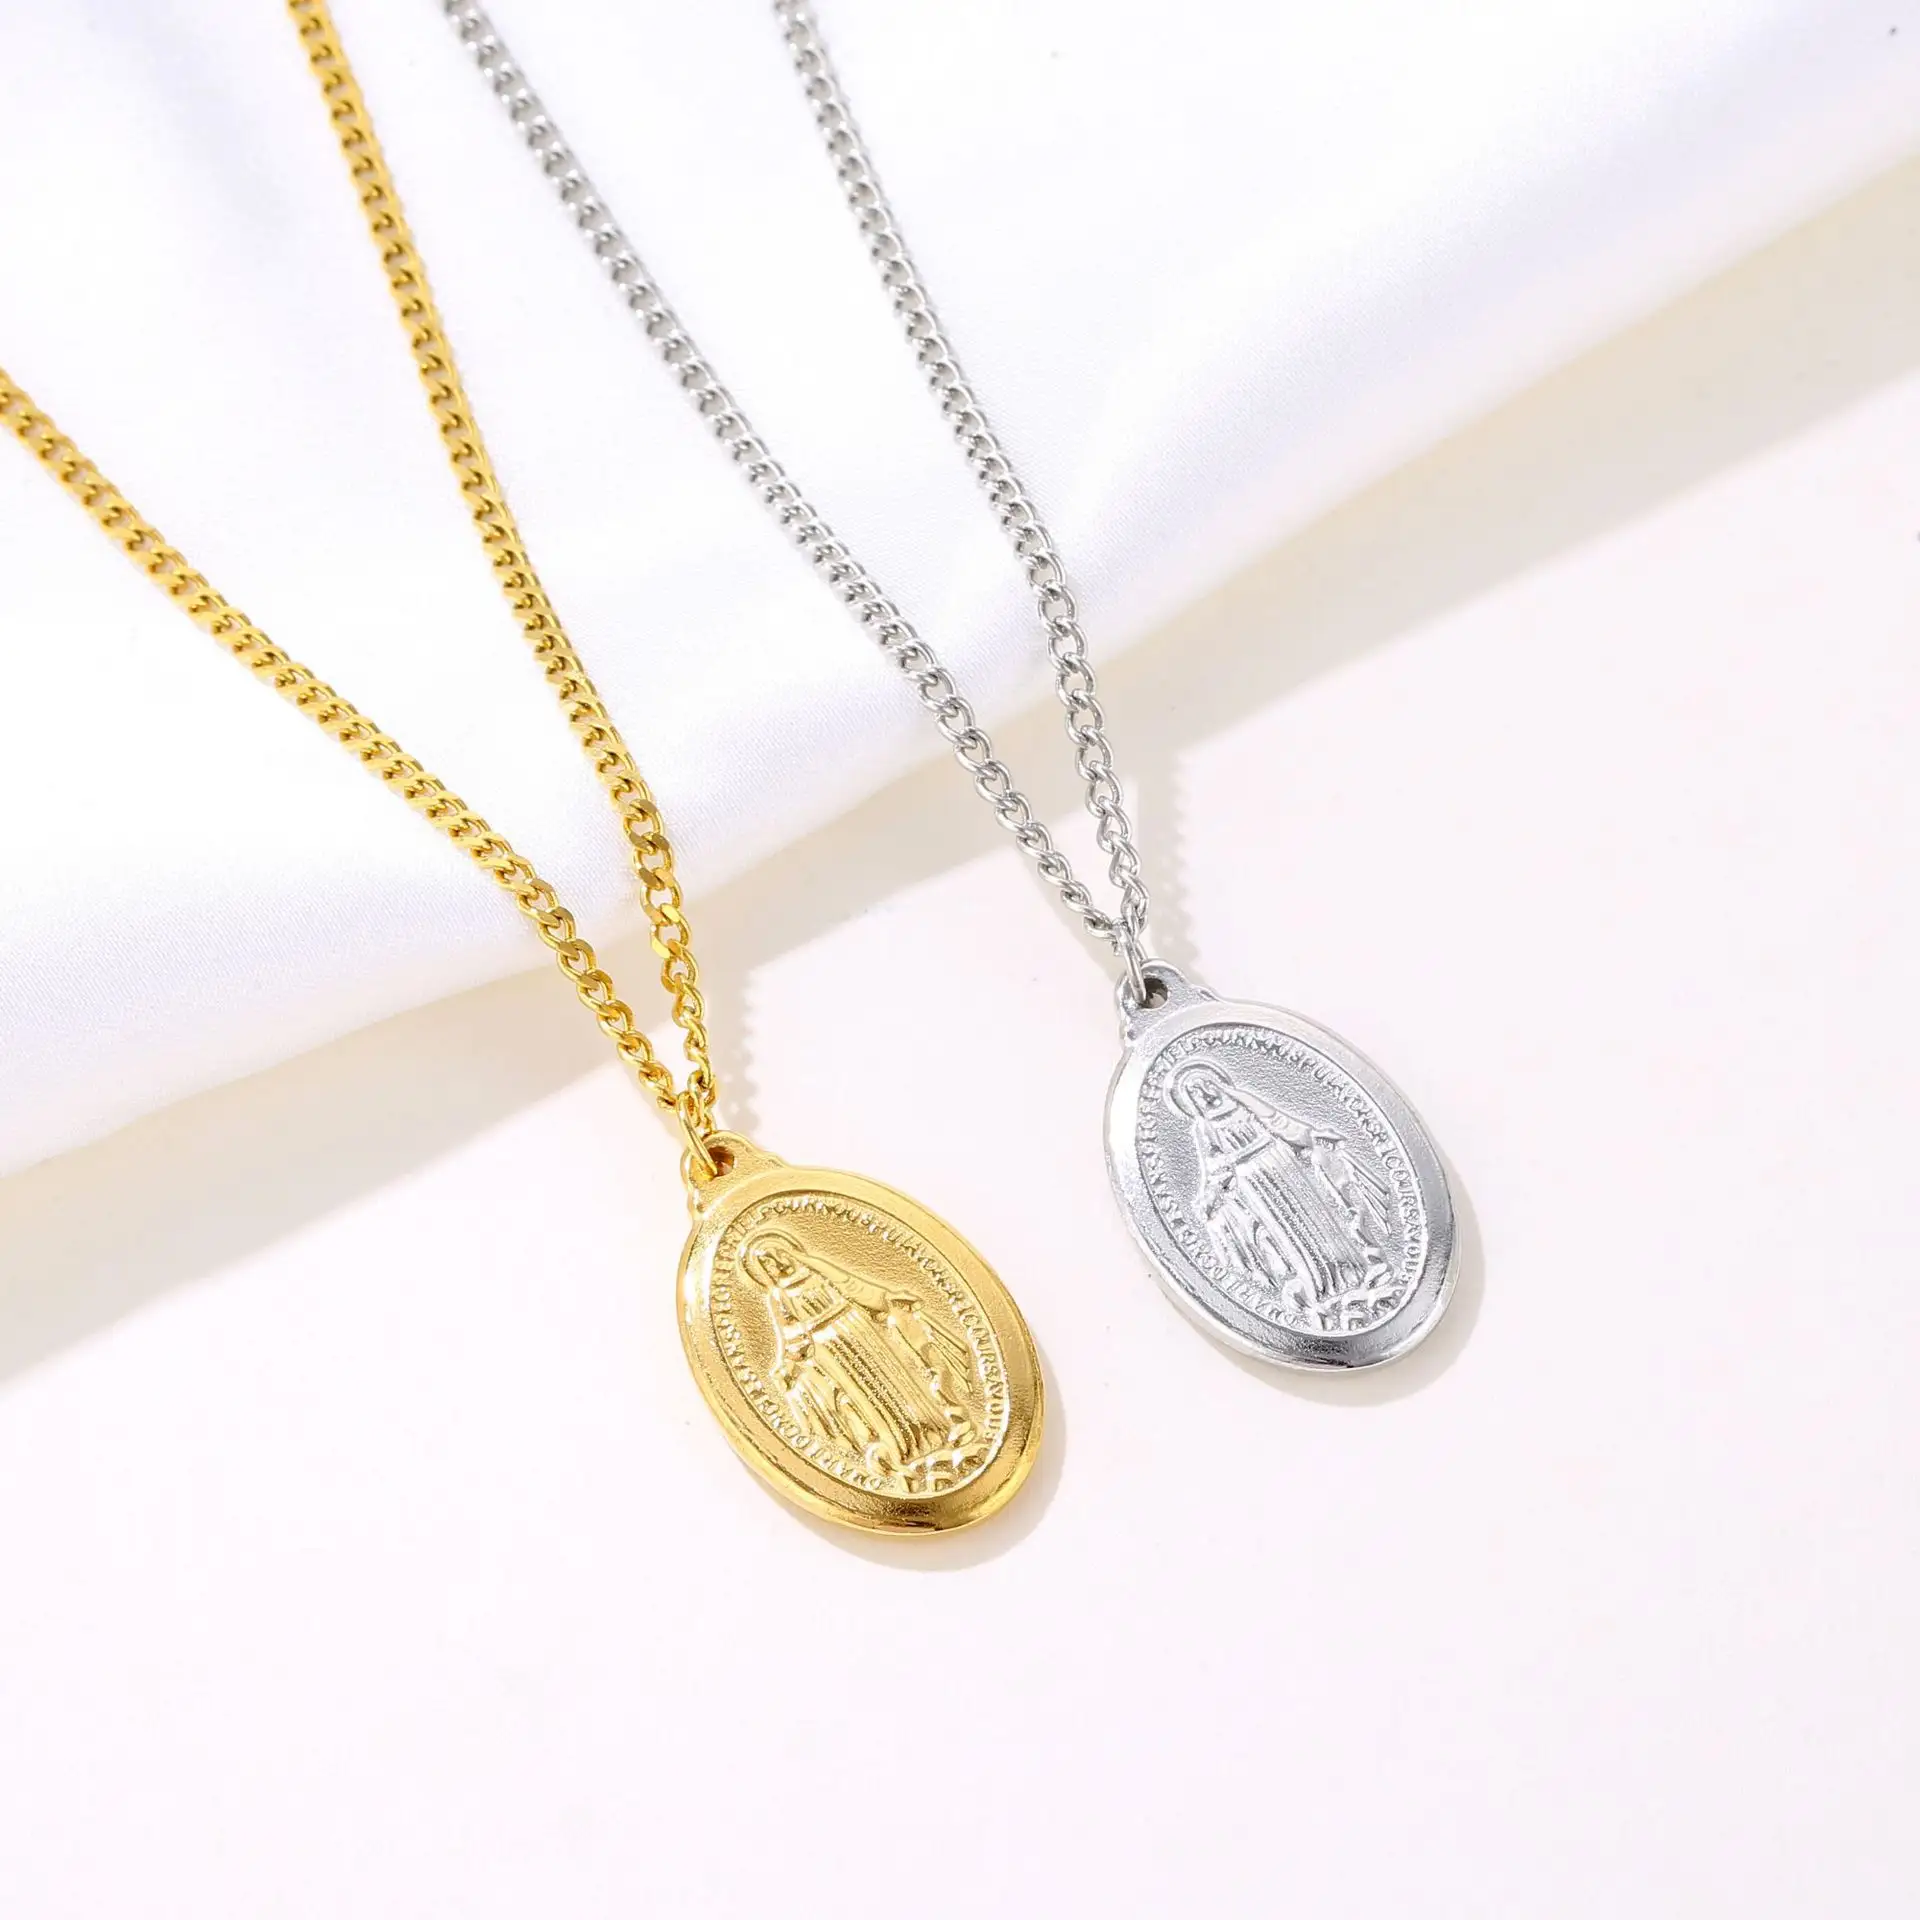 Miraculous christian Silver Gold stainless steel Catholic Vintage Medal Religious Necklaces Mary Virgin Our Lady Pendant Jewelry